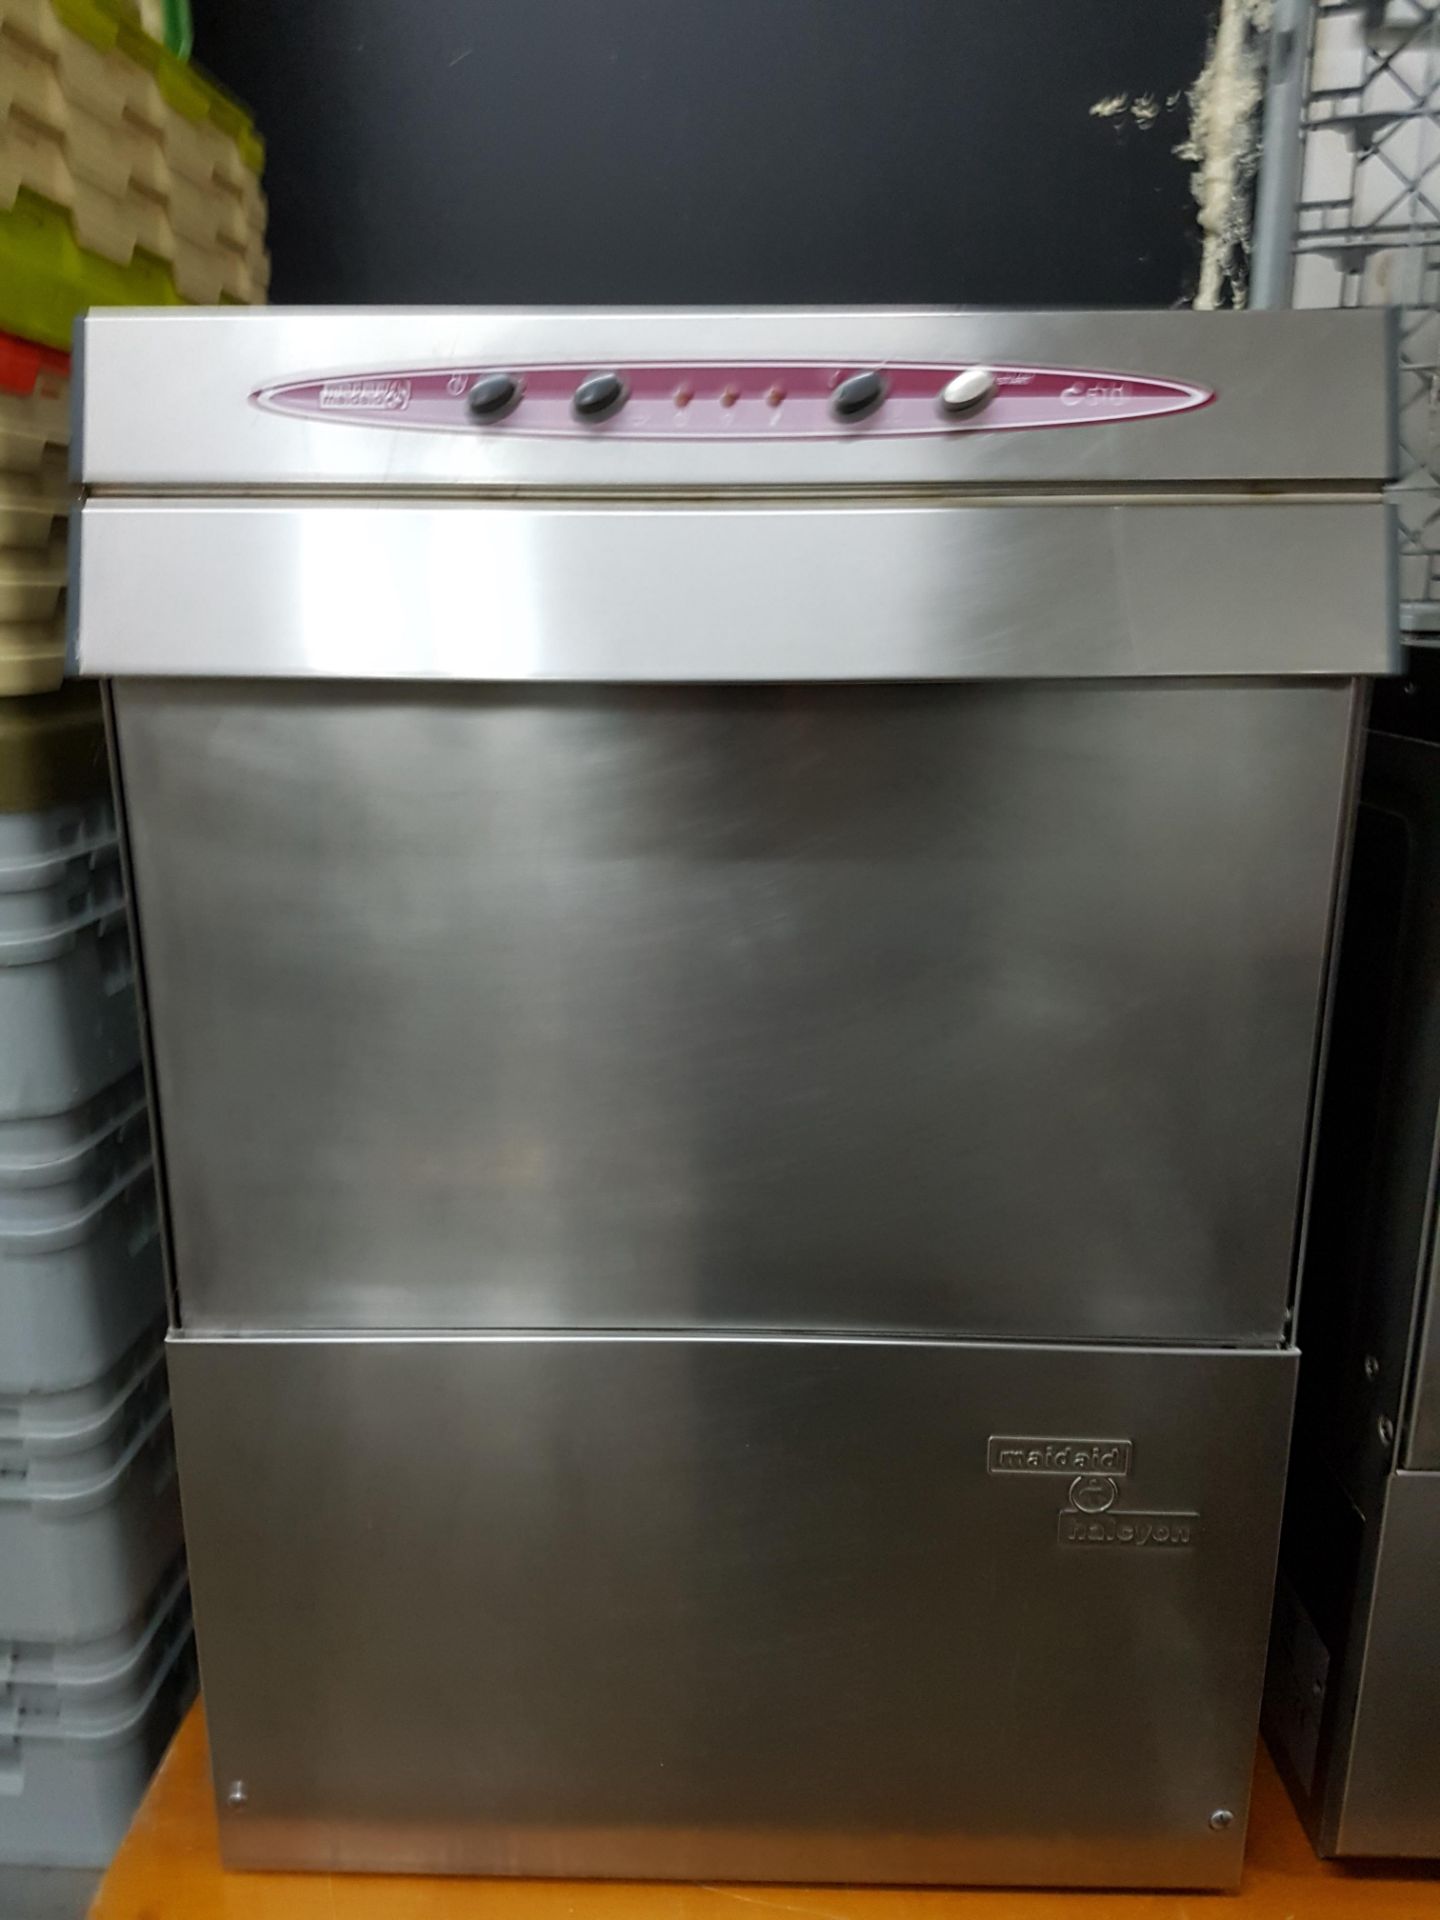 Maid Aid C510 DP Under Counter Dishwasher – 1ph- Fully Serviced & Tested new PCB, drain pump,